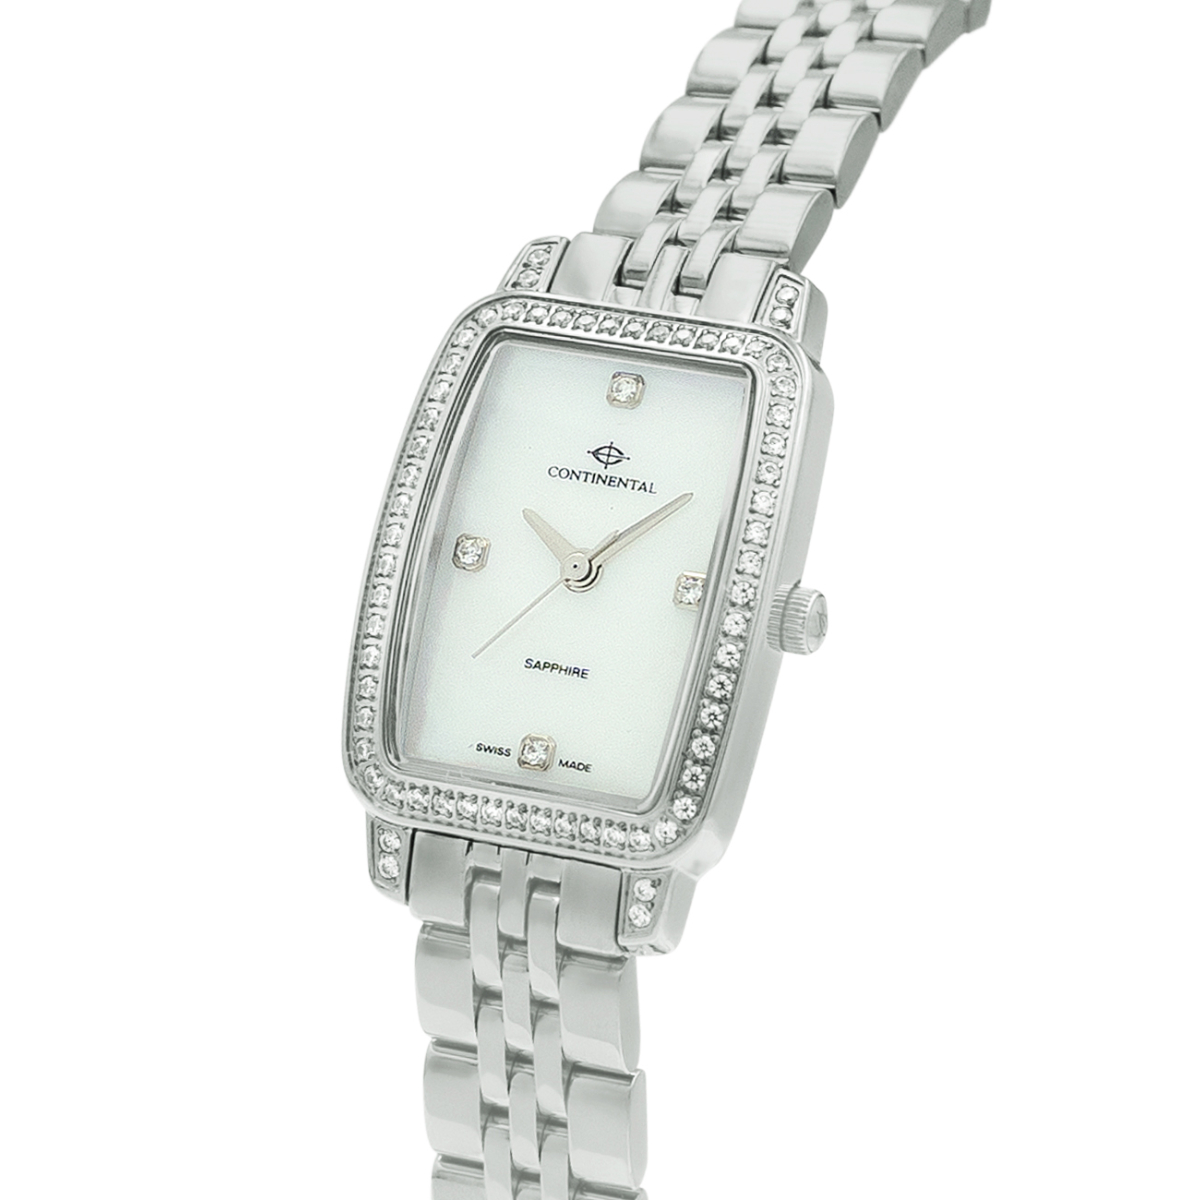 Continental Ladies Dress Watch 20351-LT101501 - side angle view